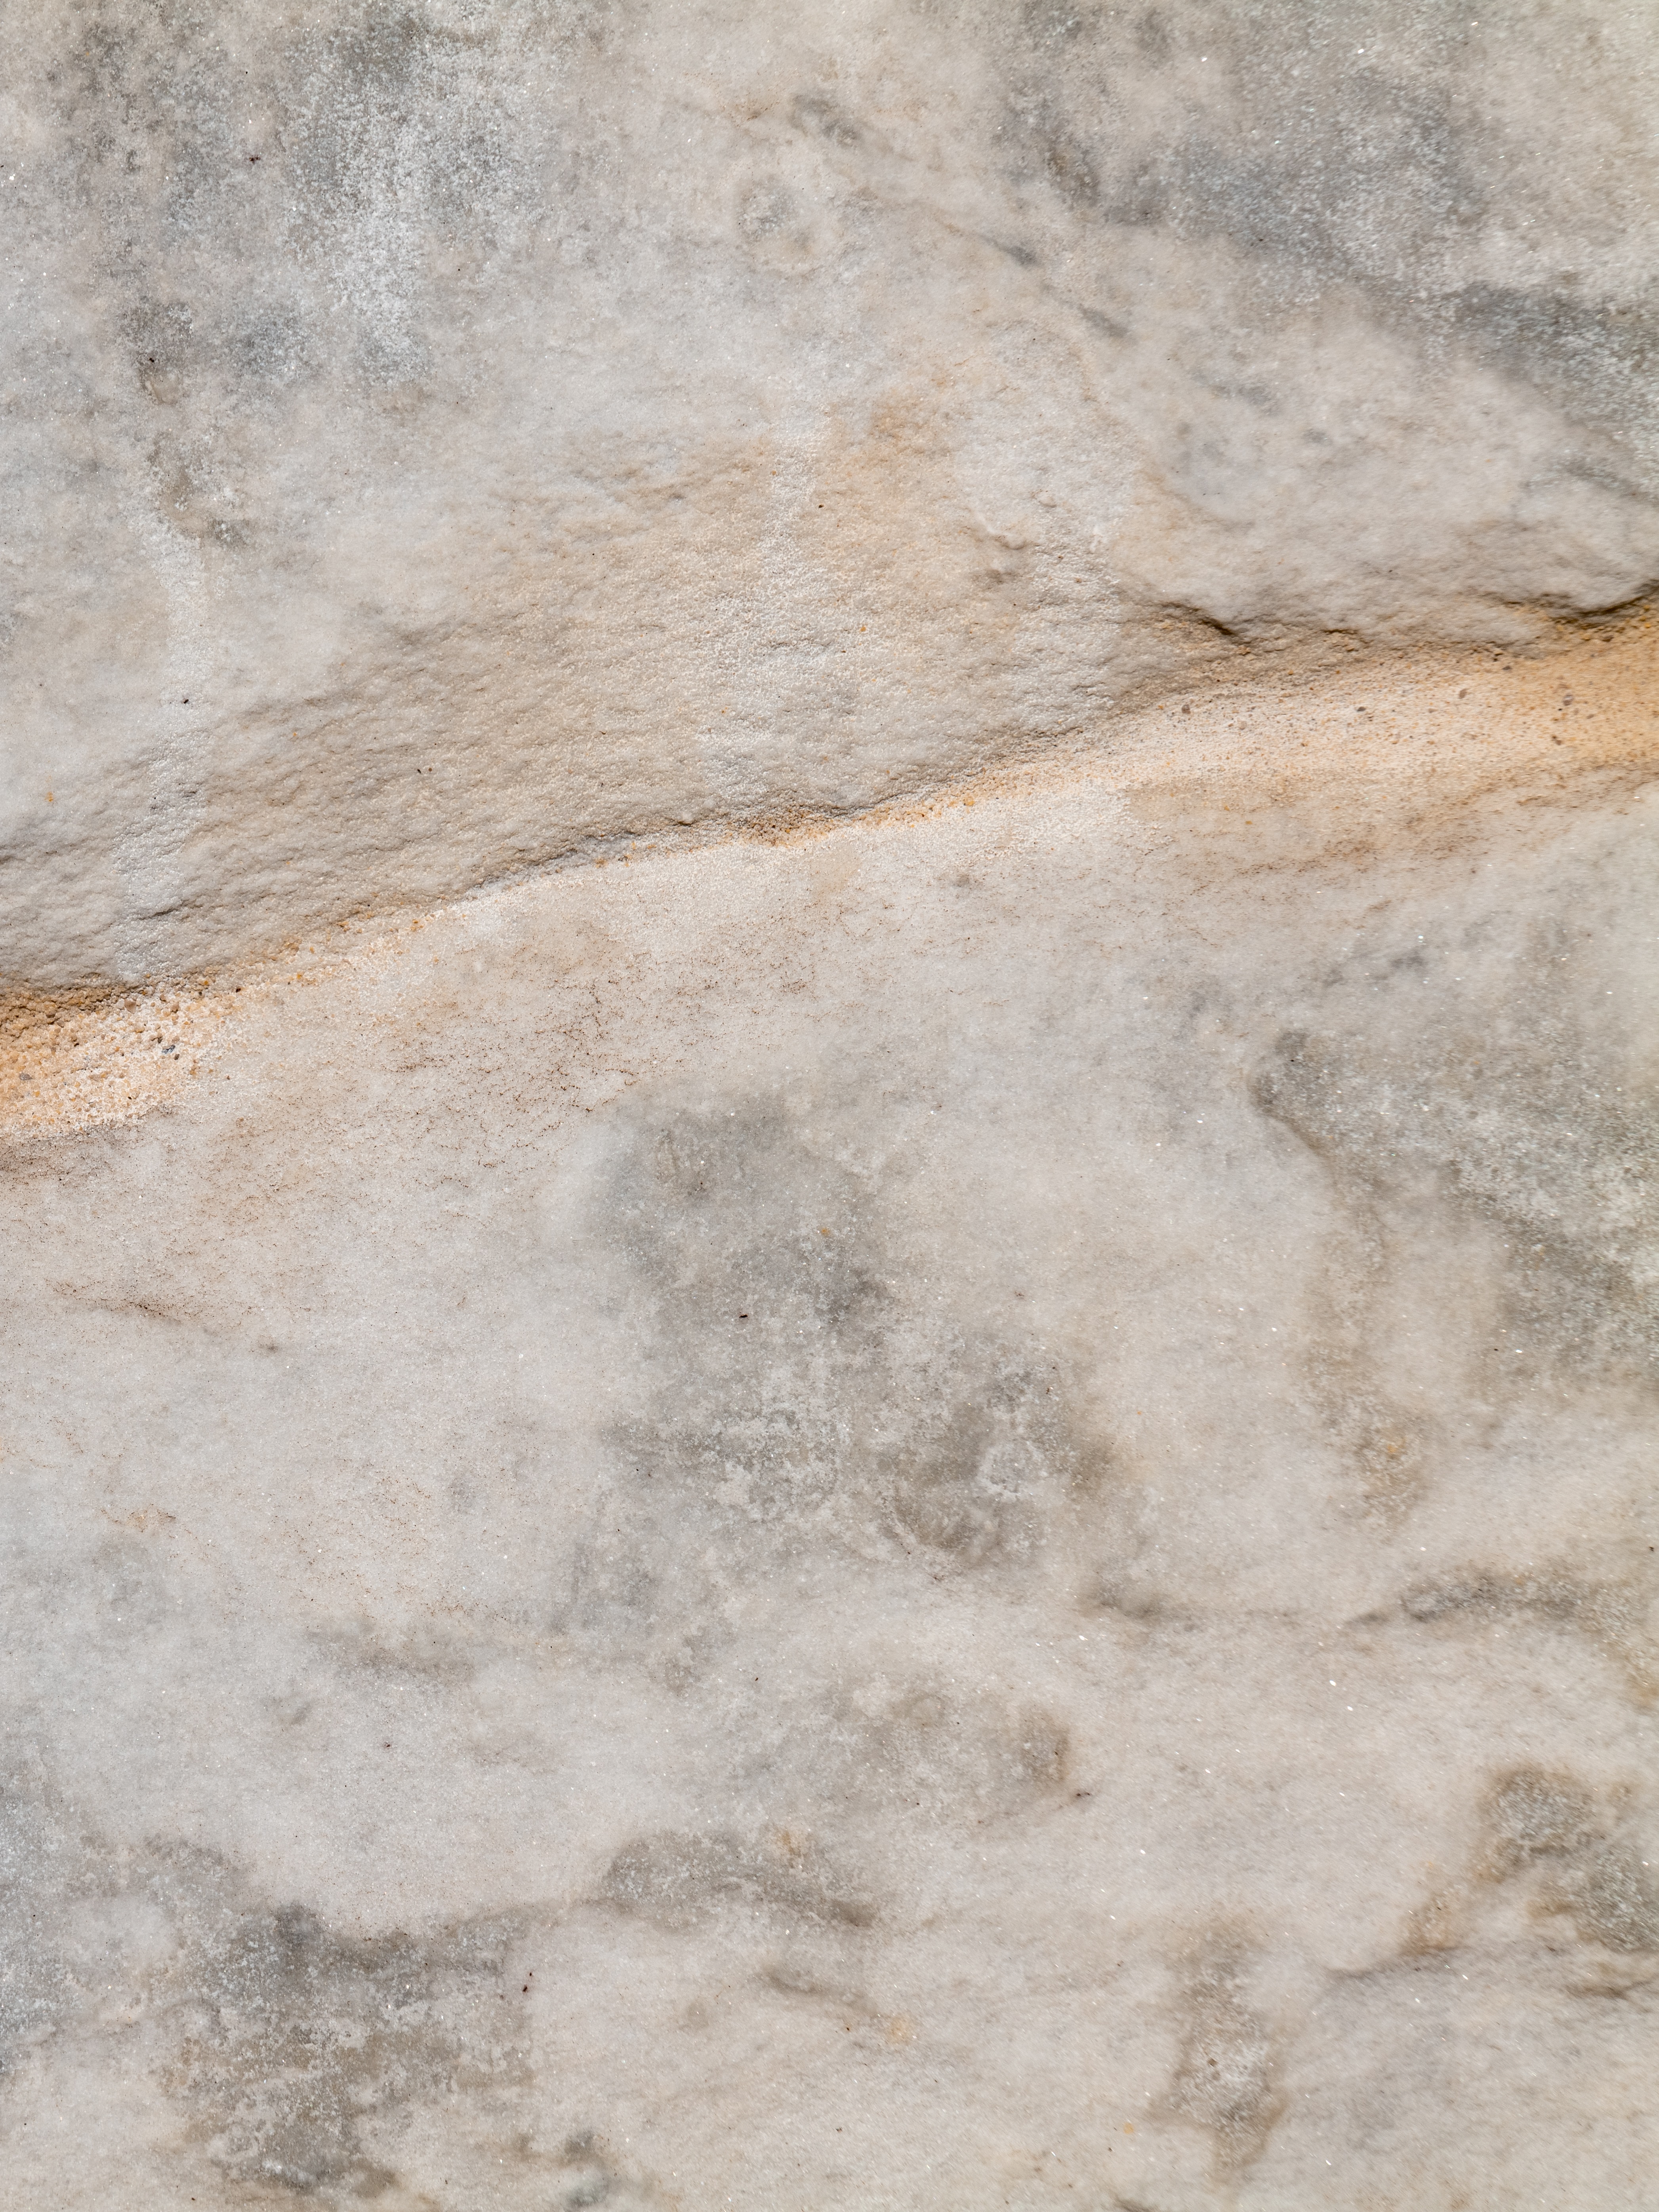 white, rock, texture, textures, surface, stone, marble